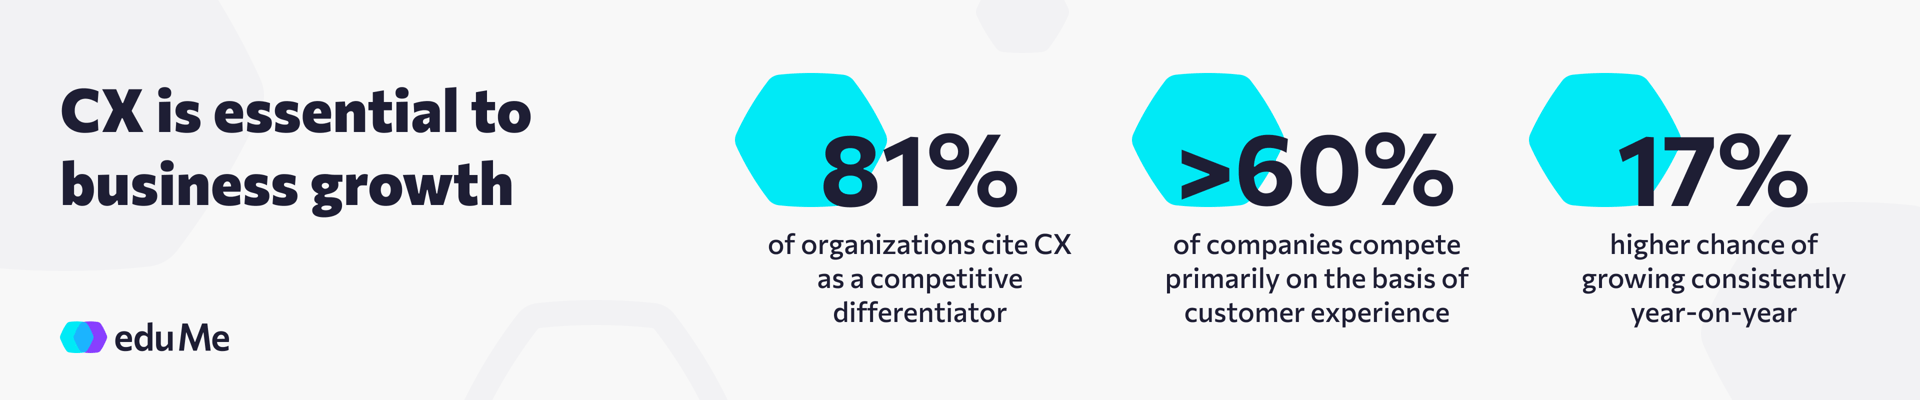 eduMe Infographic: CX is essential to business growth